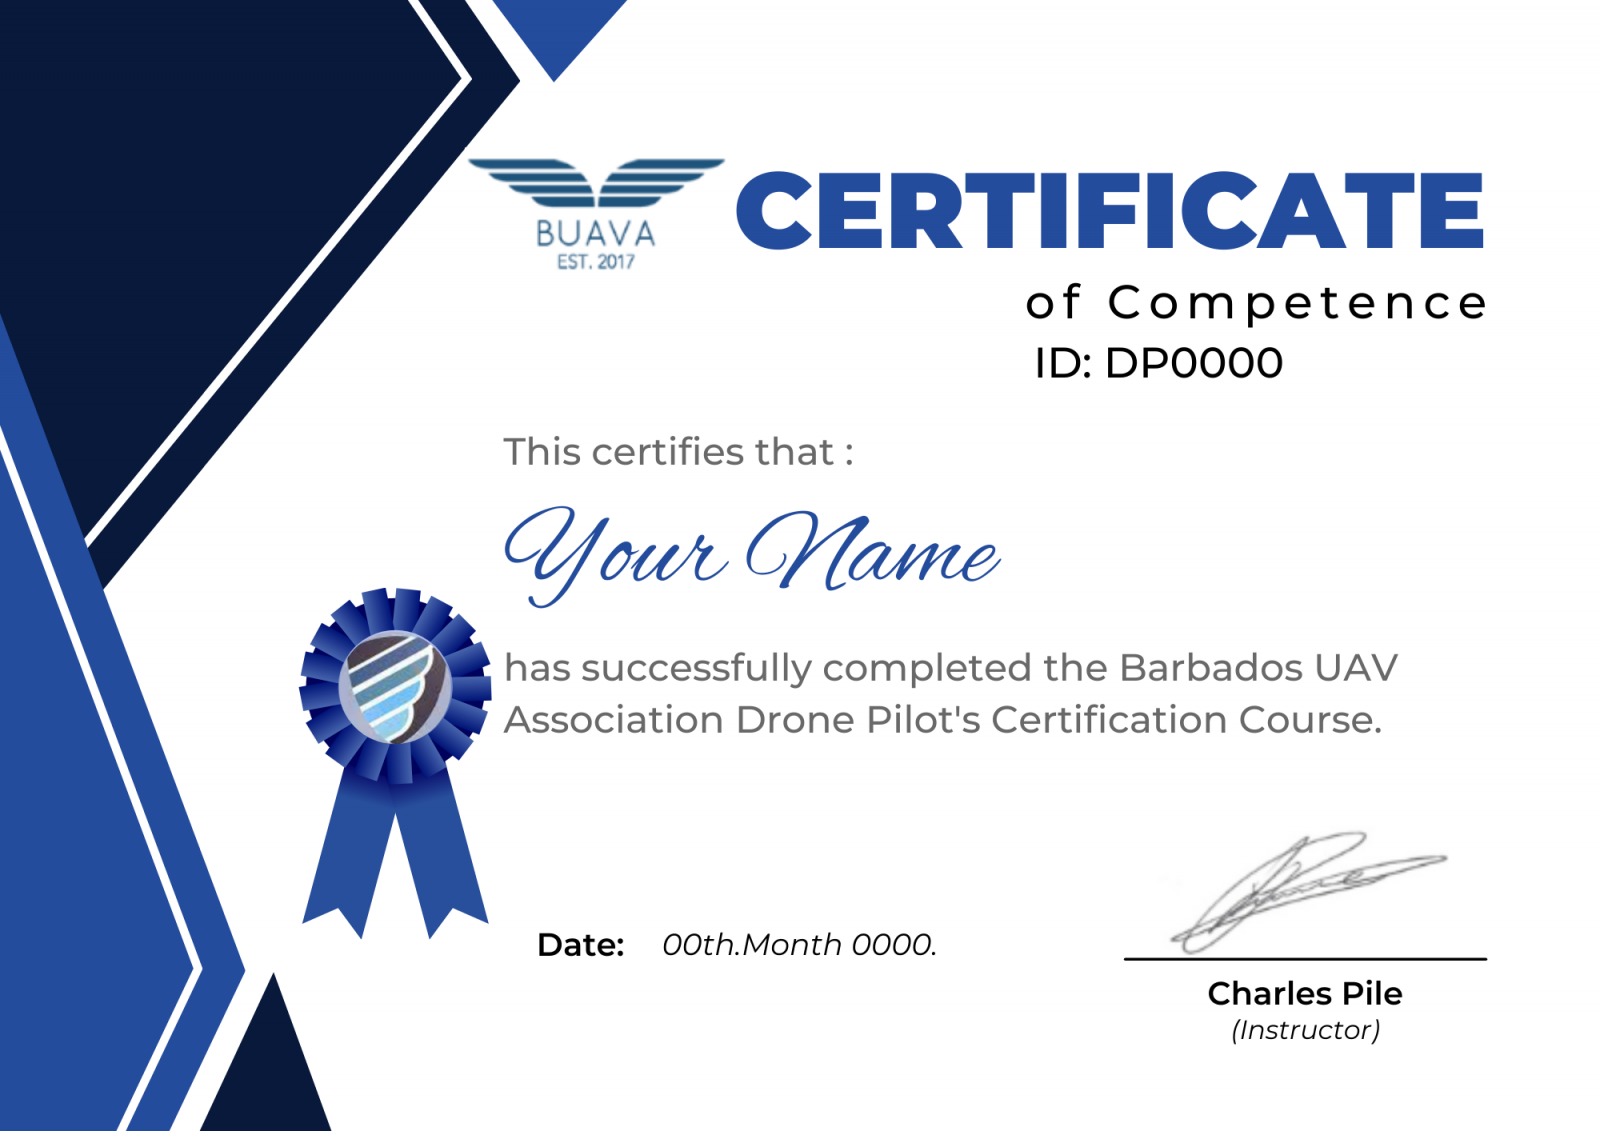 Drone Training Instruction course is available at cpnetconsultancy biz